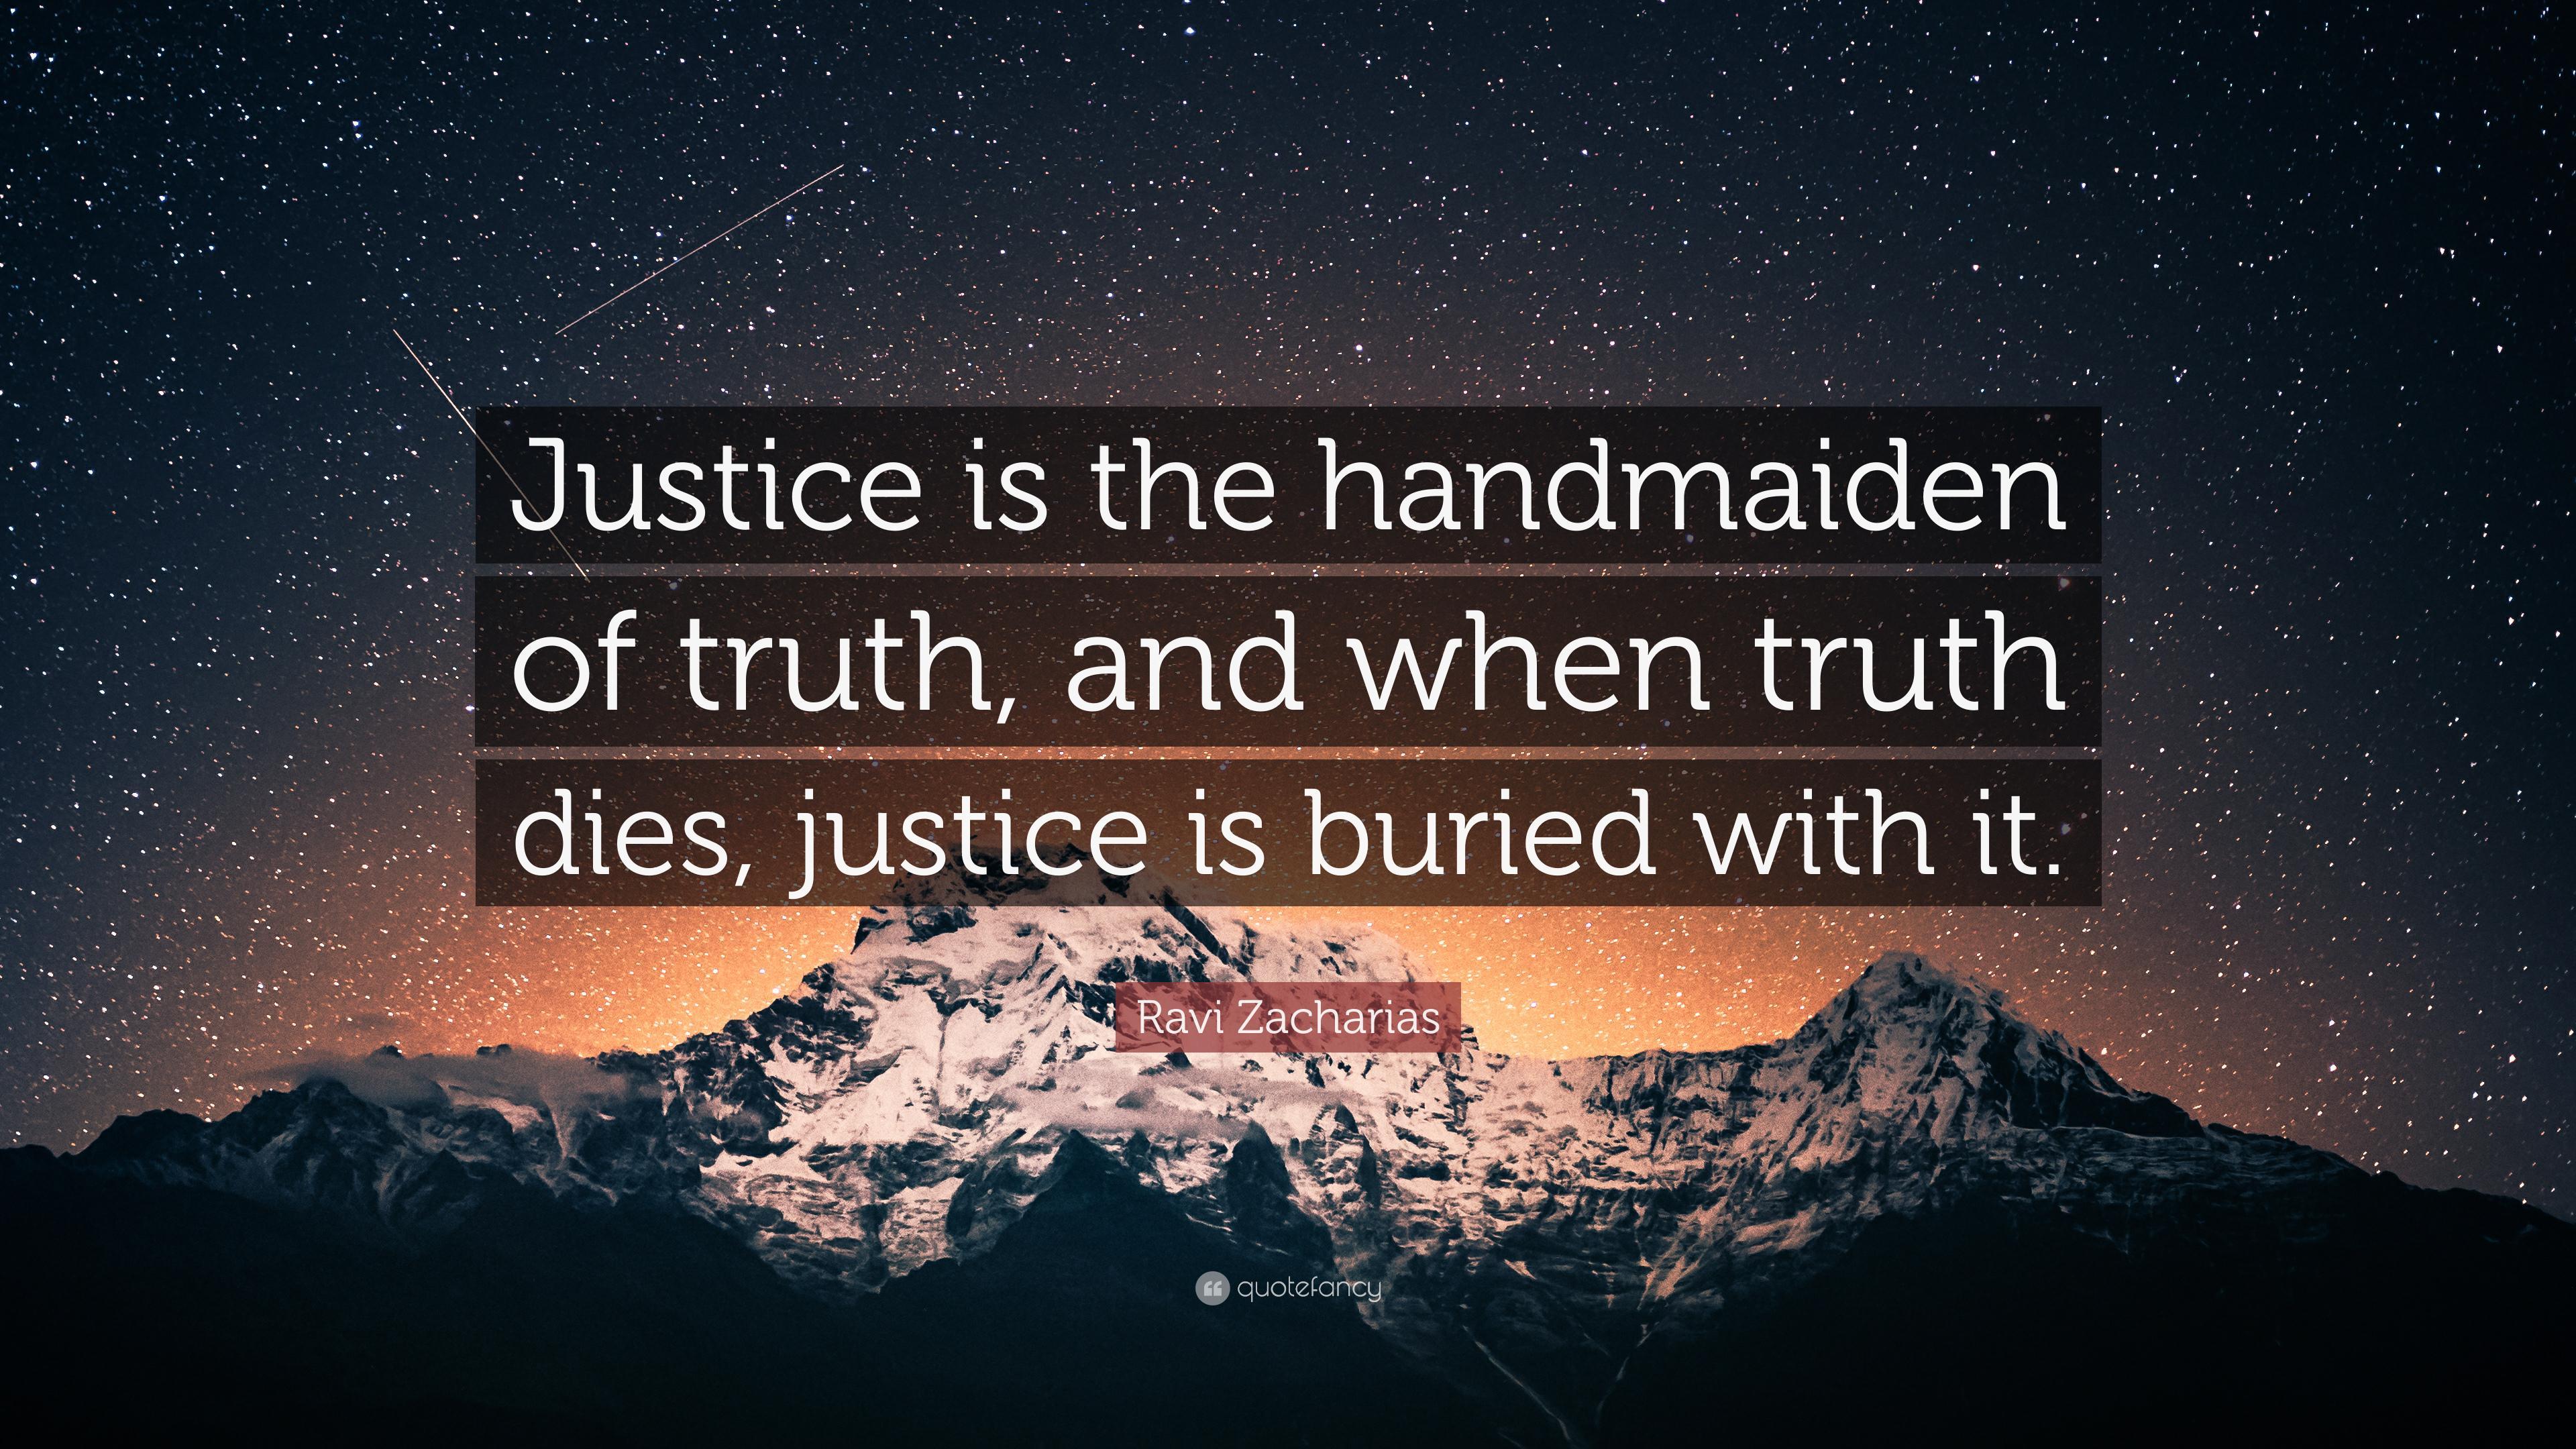 Ravi Zacharias Quote: “Justice is the handmaiden of truth, and when